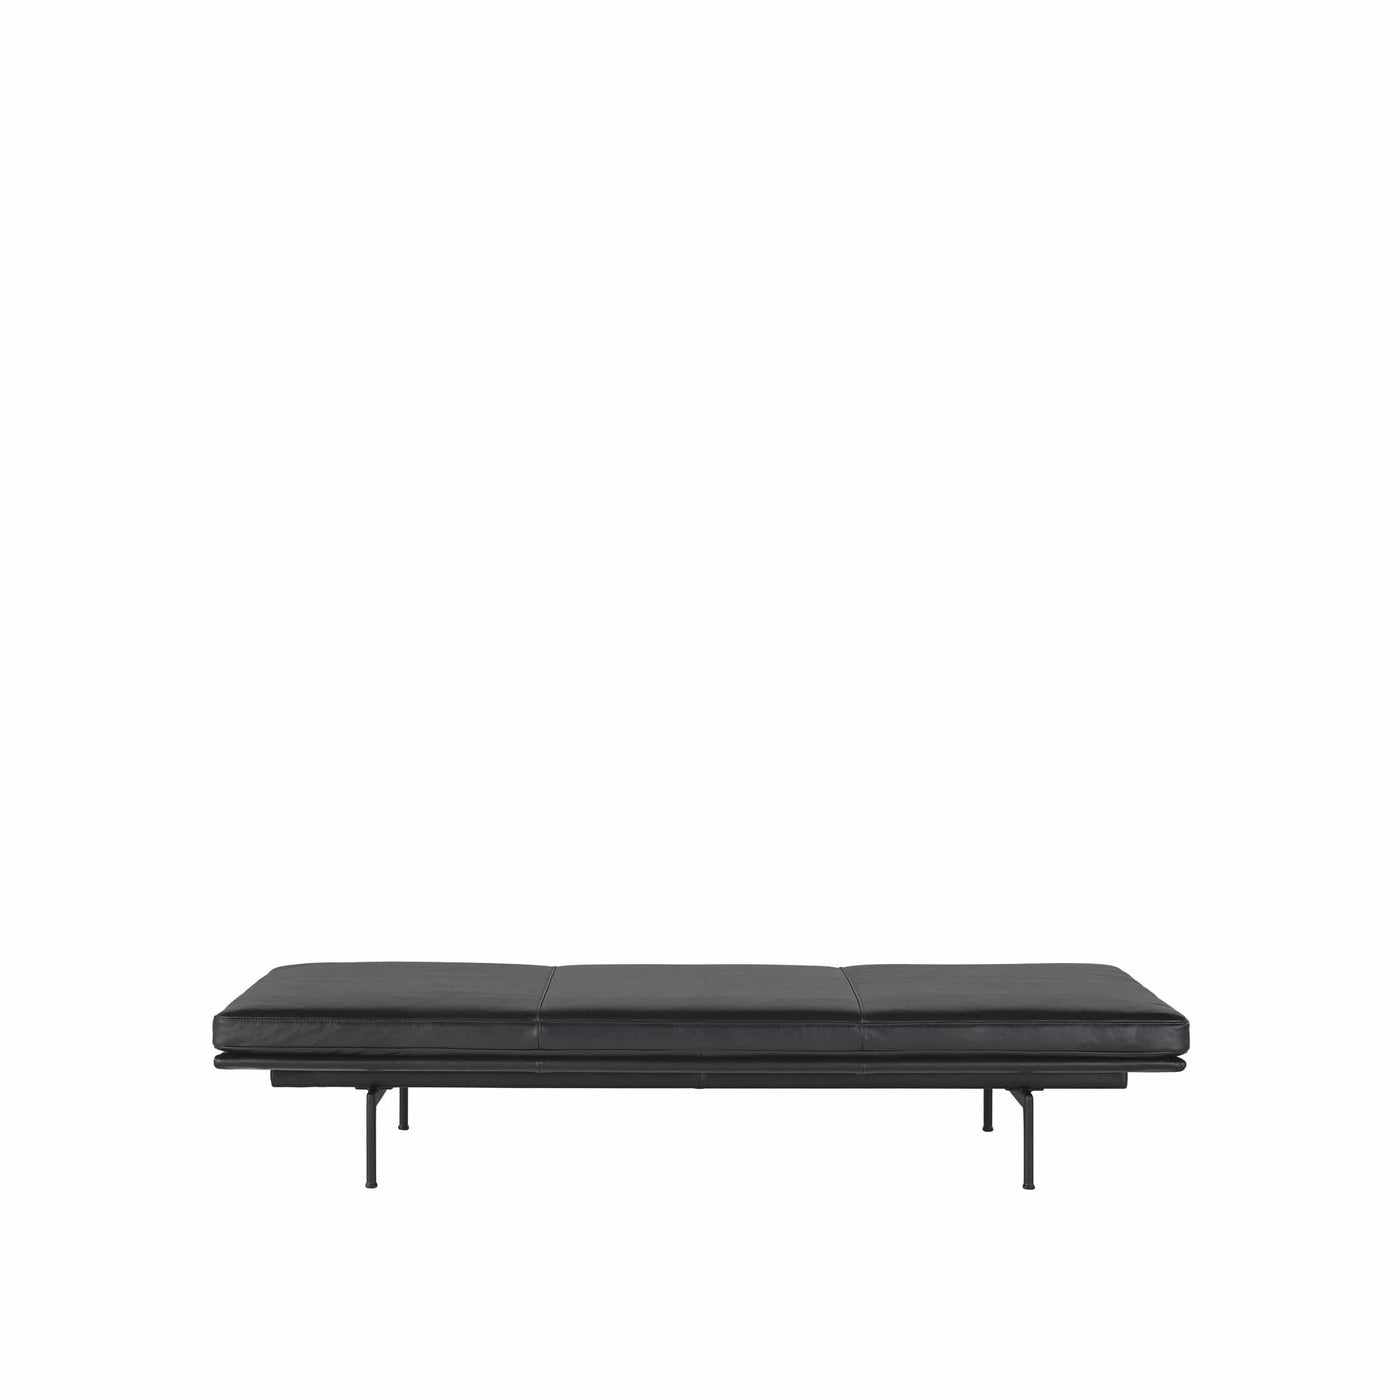 Muuto Outline Daybed in black refine leather and black steel base. Made to order from someday designs.